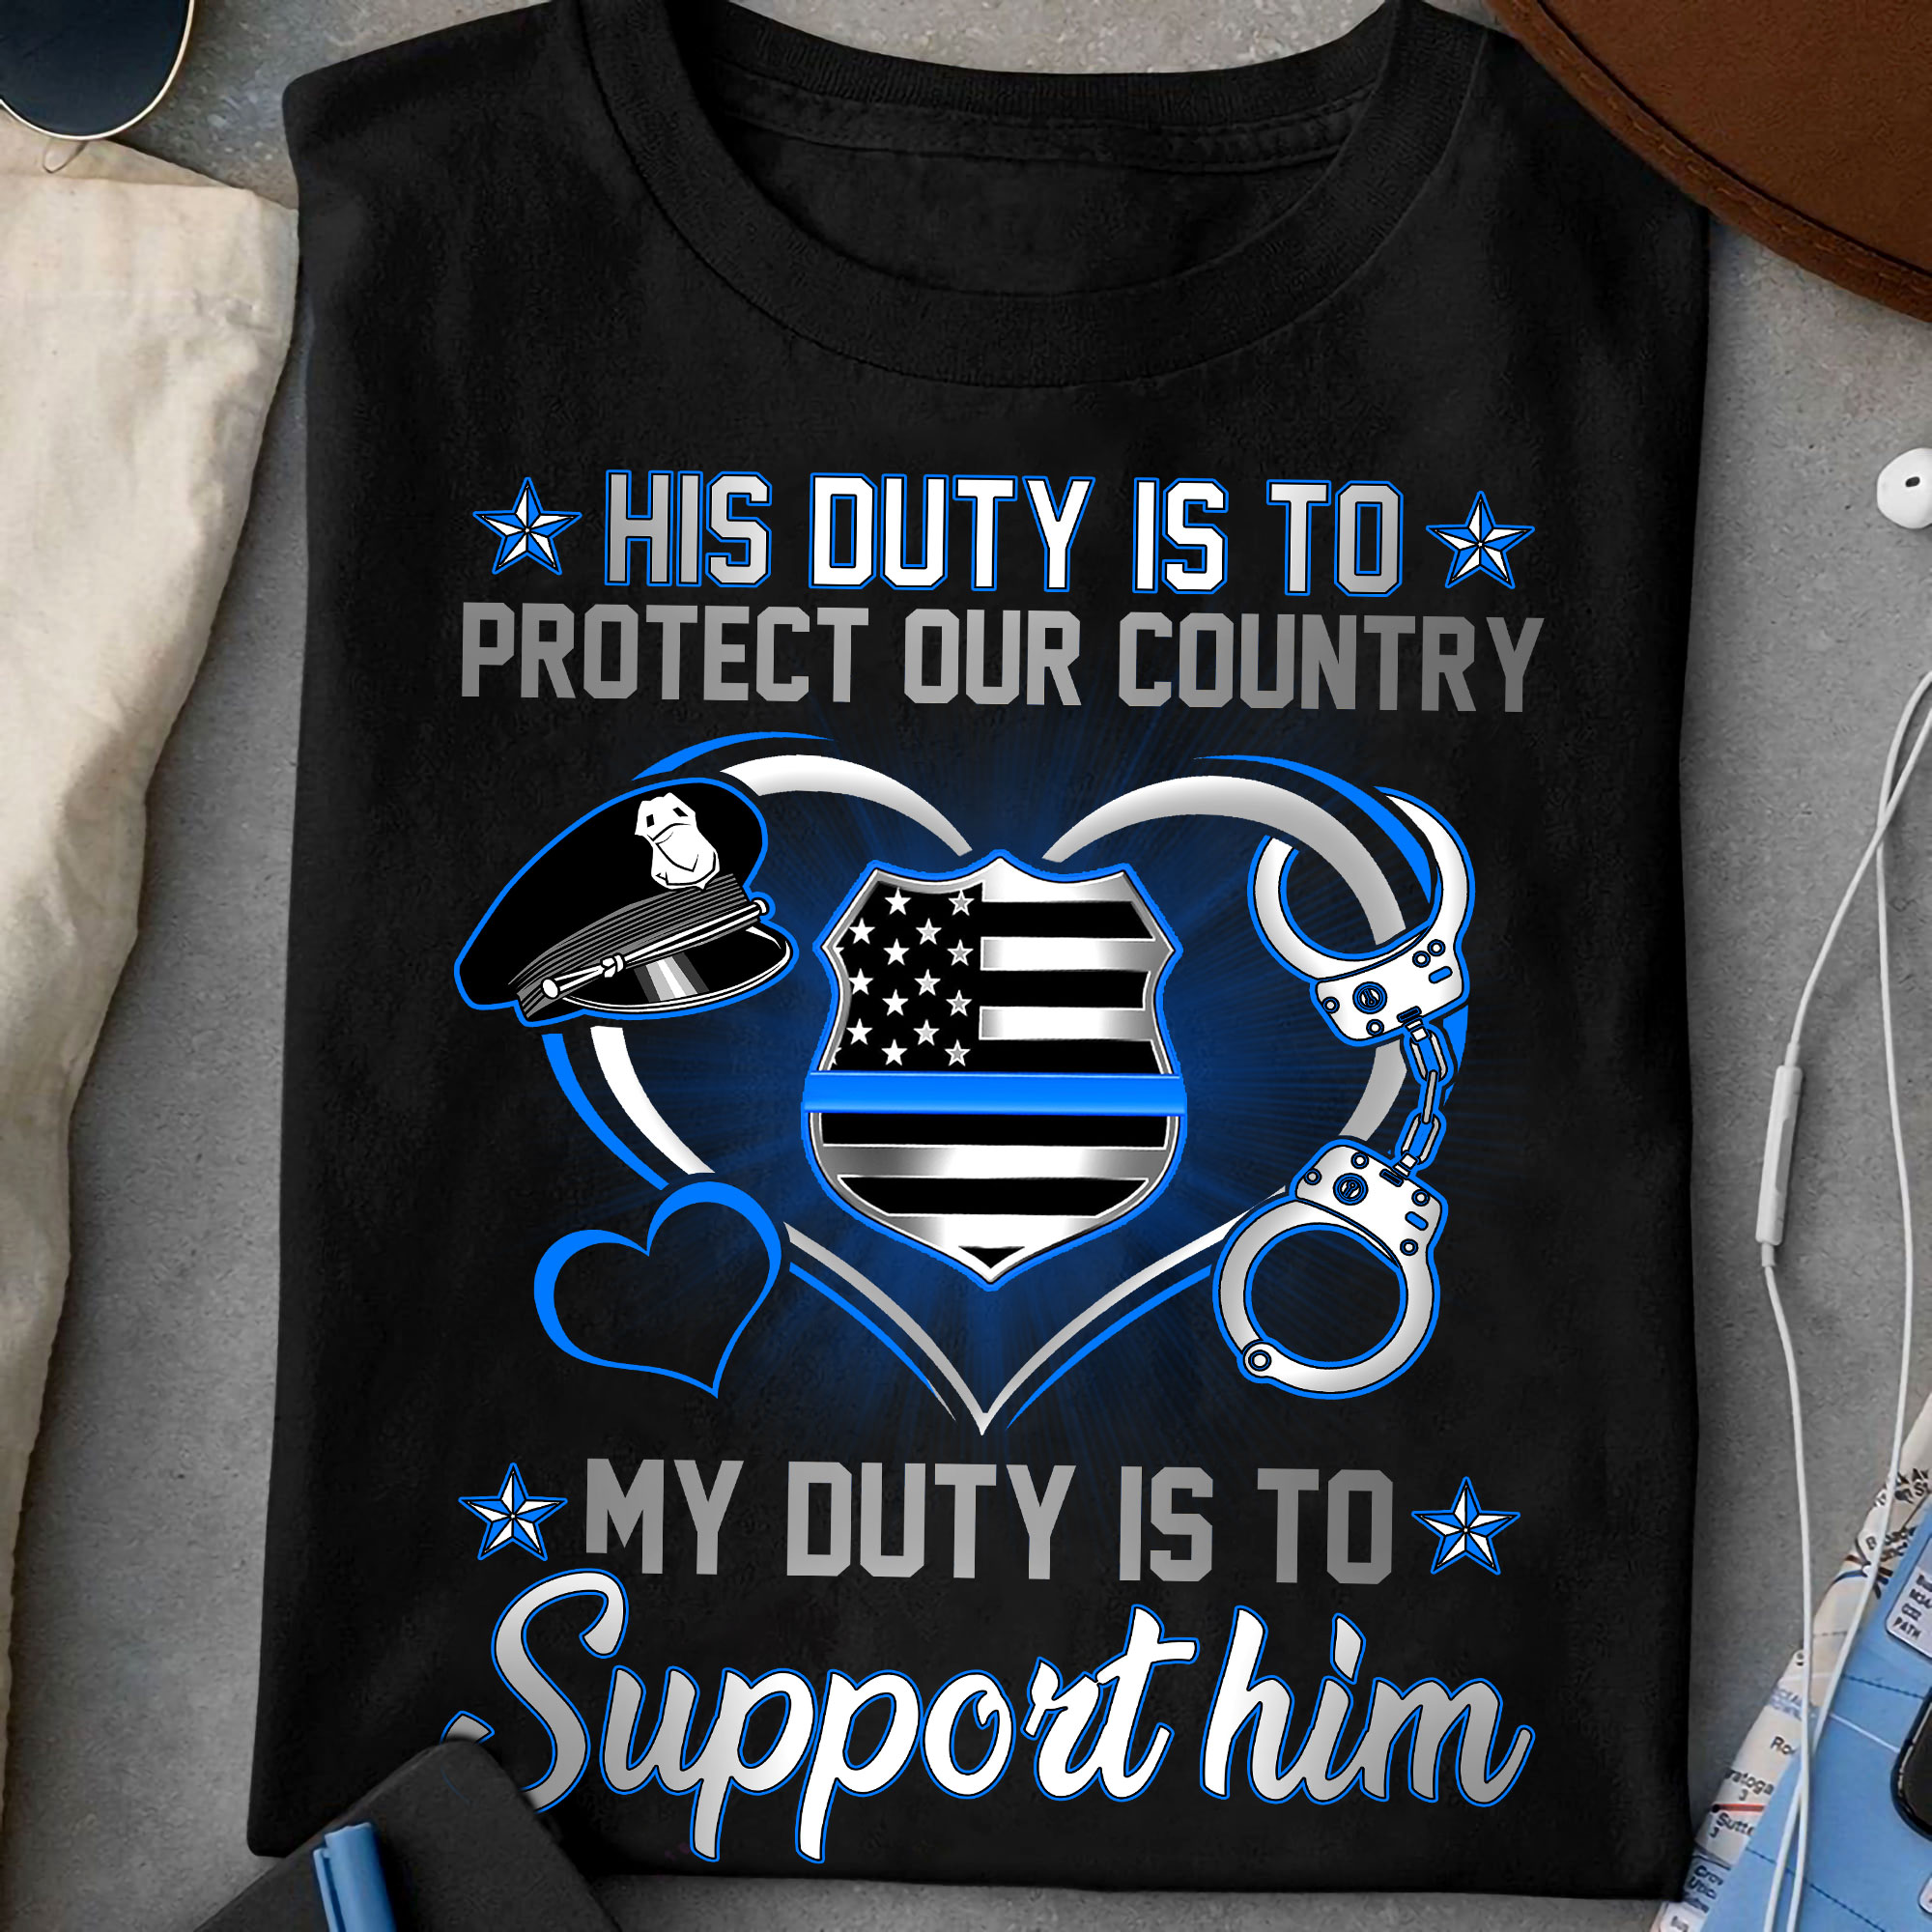 His duty is to protect our country my duty is to support him - Police the job